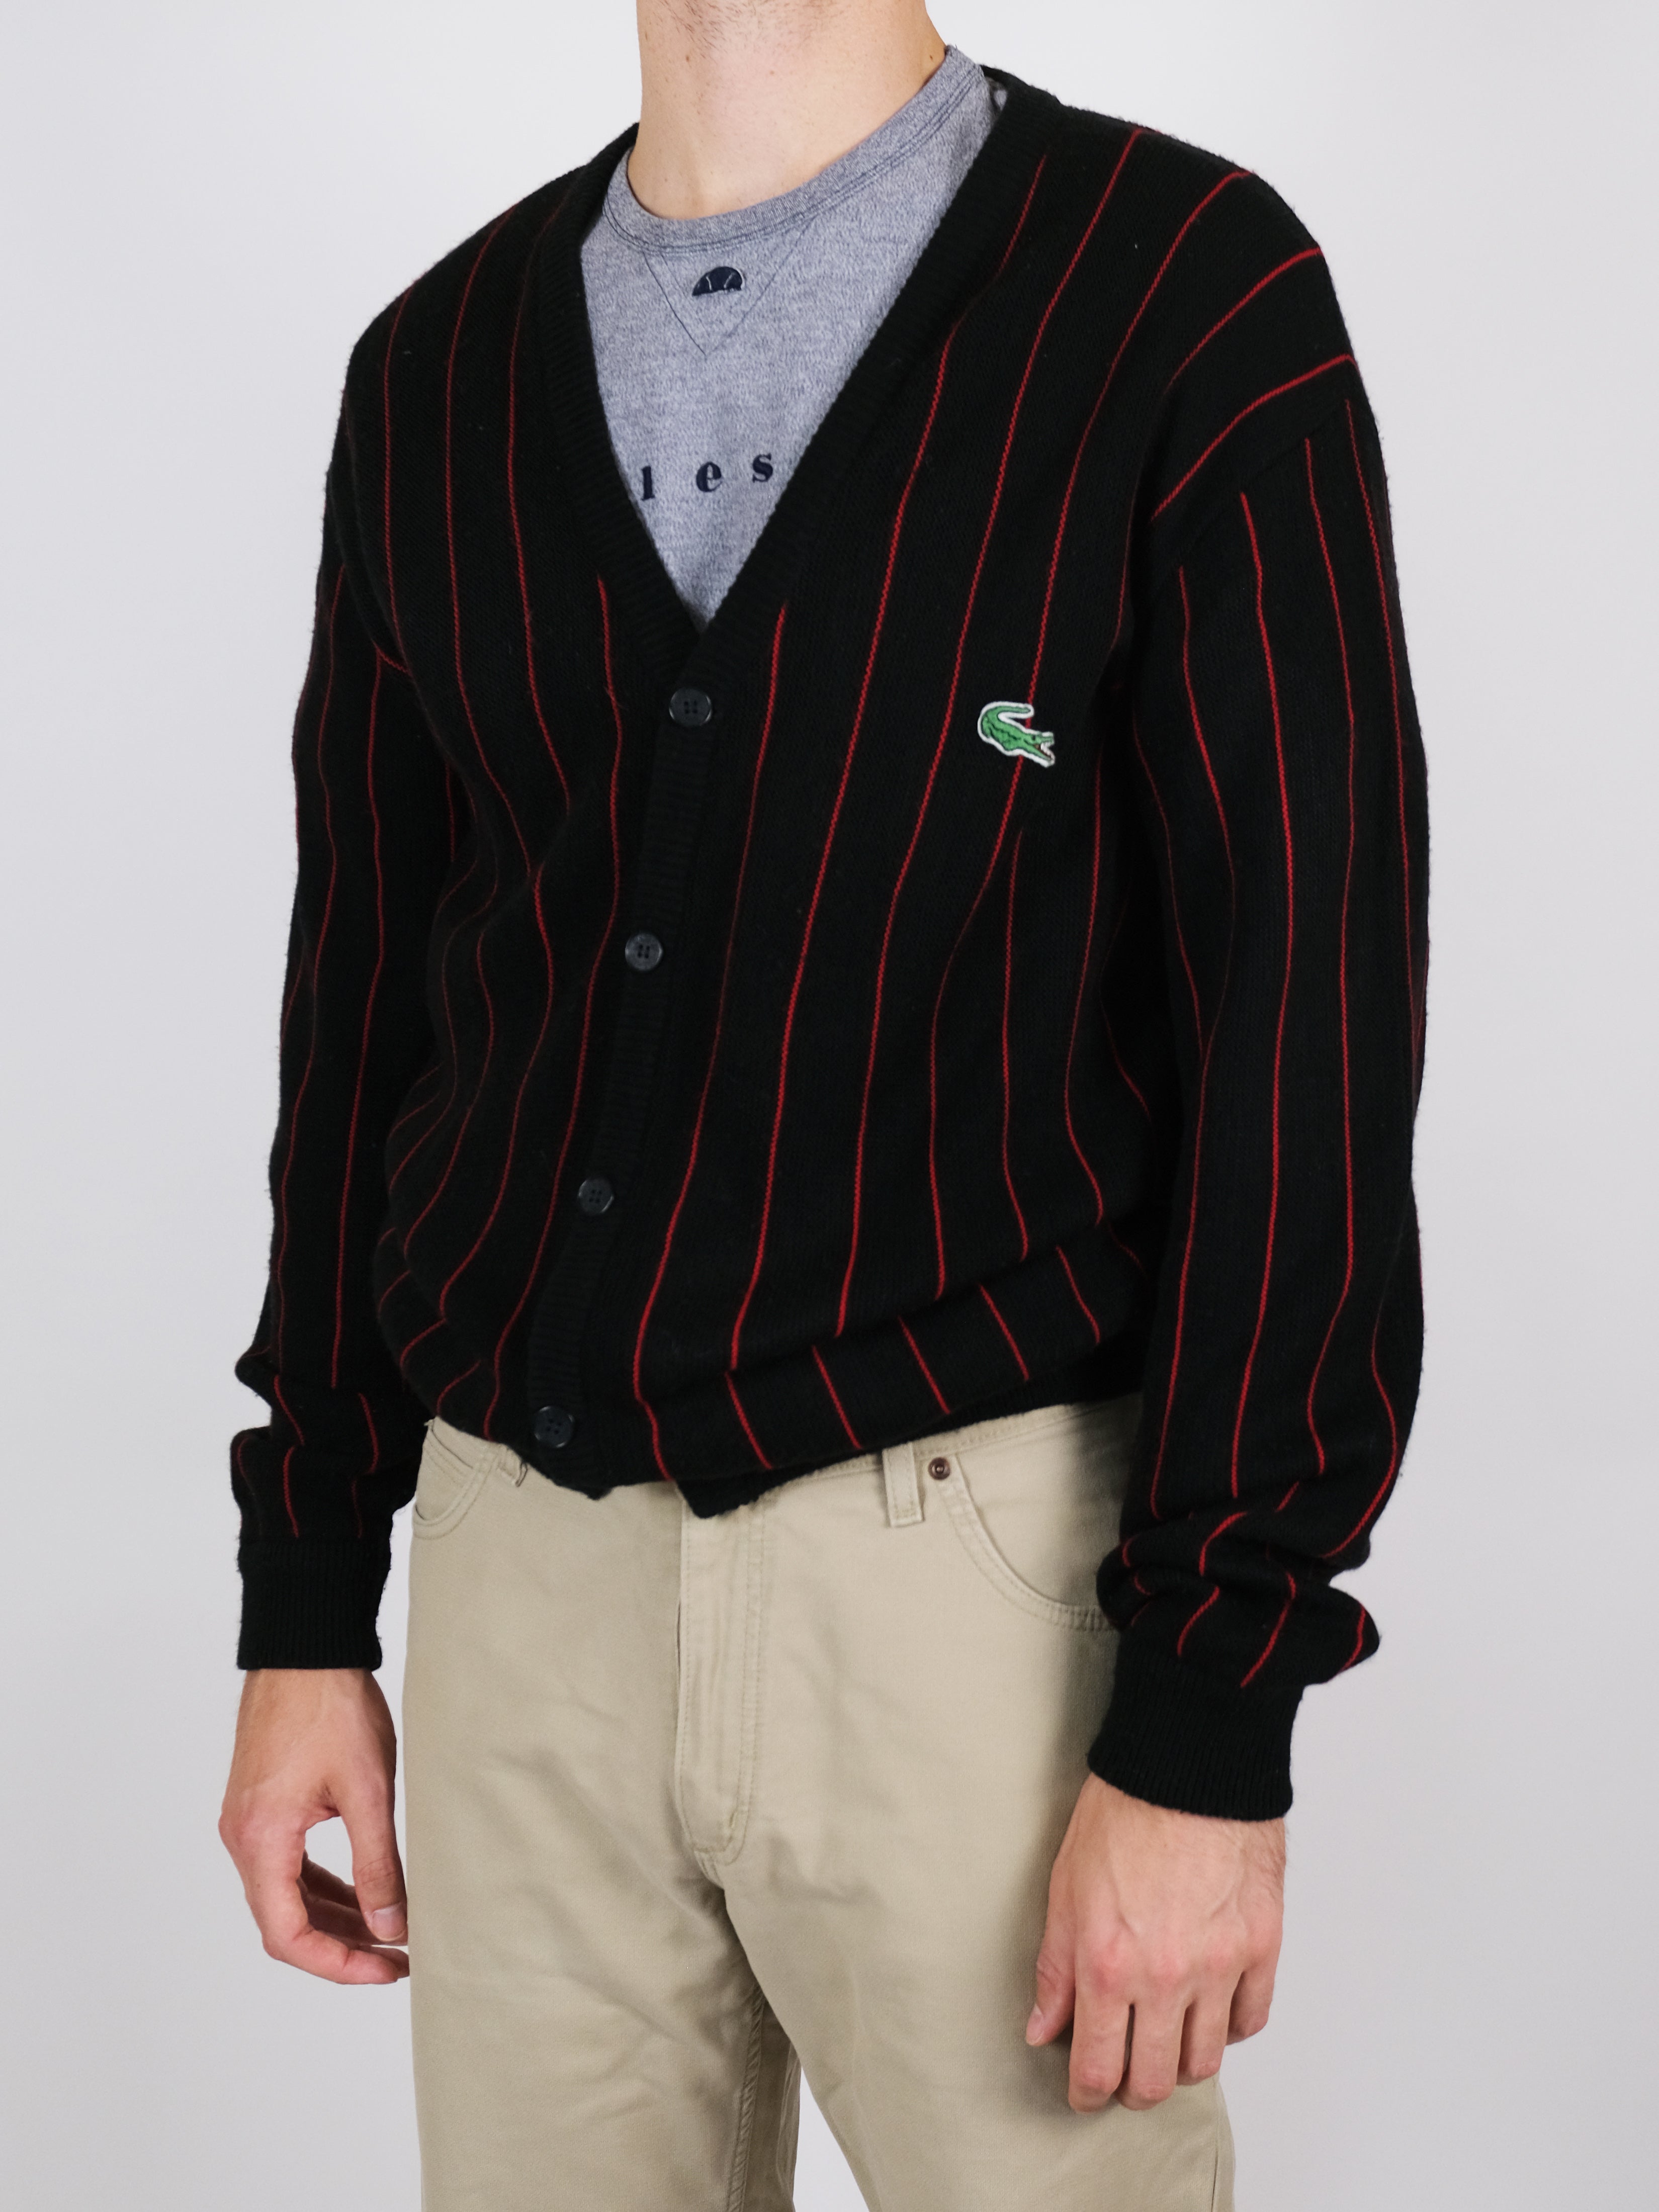 Lacoste cardigan with stripes